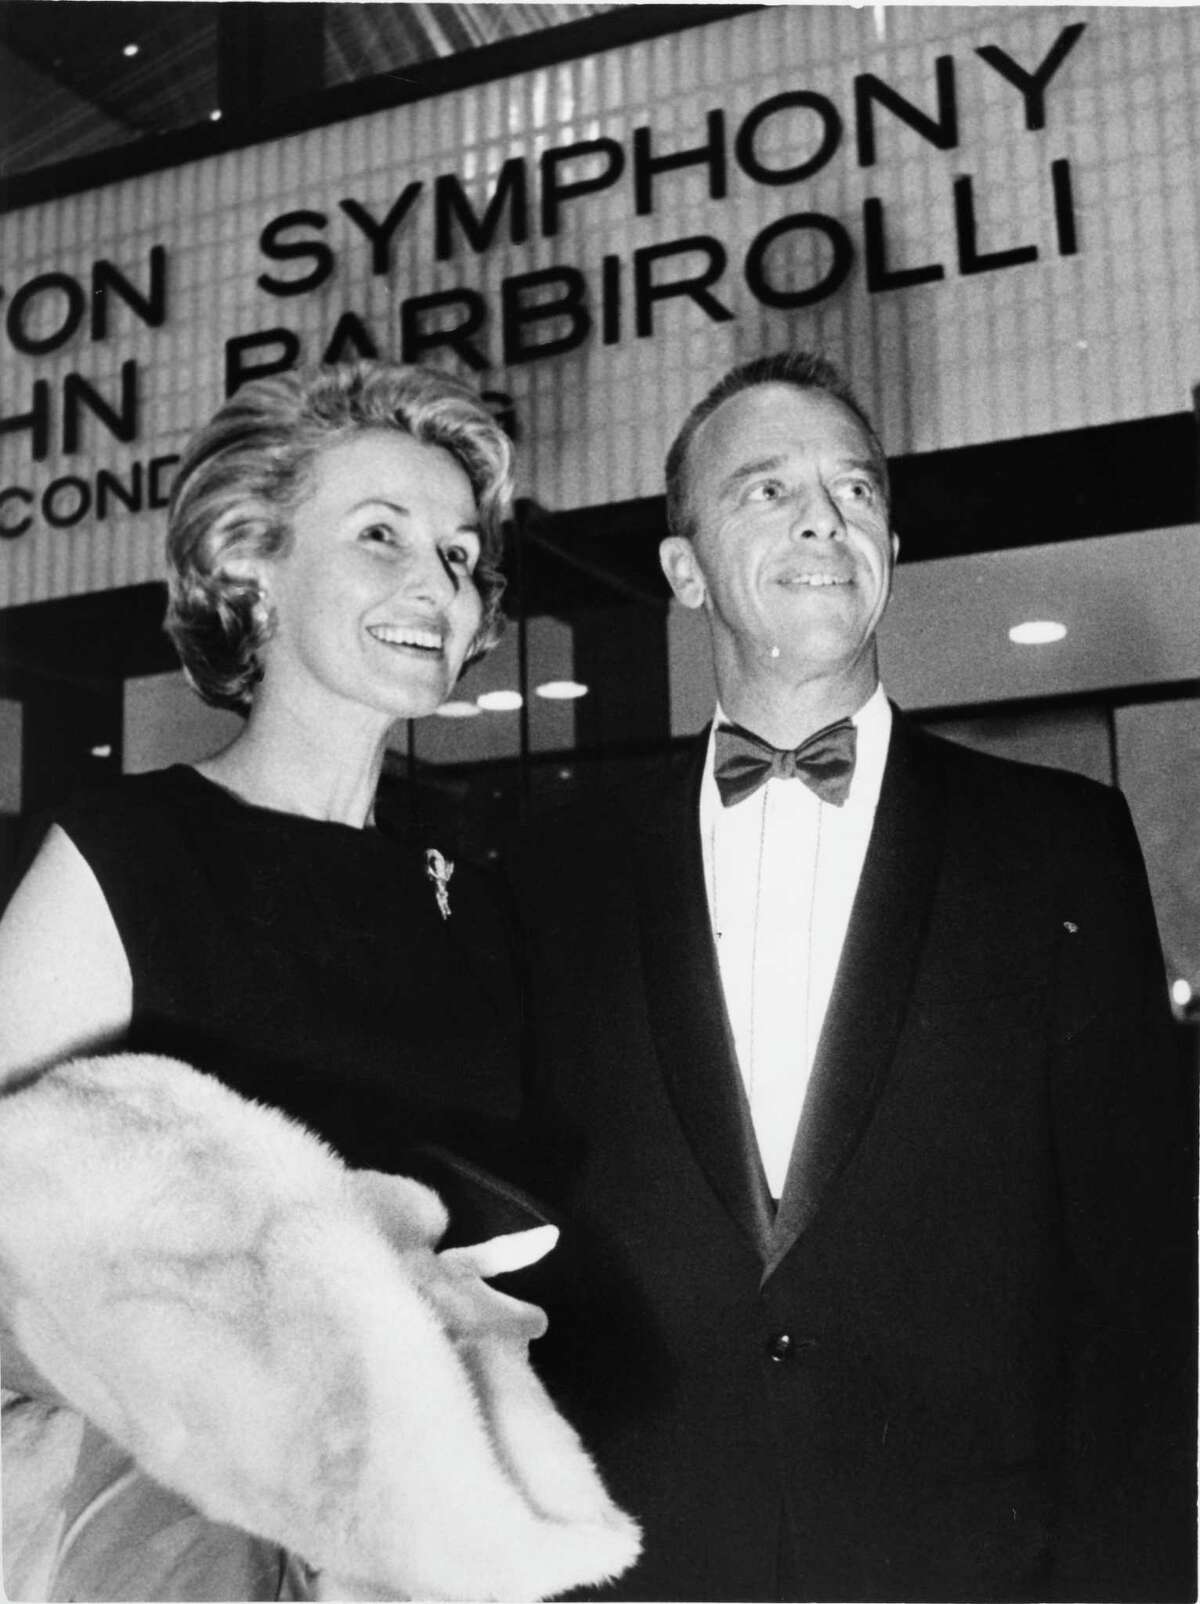 10/03/1966 - Astronaut Alan Shepard and his wife, Louise, attend the grand opening concert performed by the Houston Symphony and dedication ceremony of Jesse H. Jones Hall for the Performing Arts.